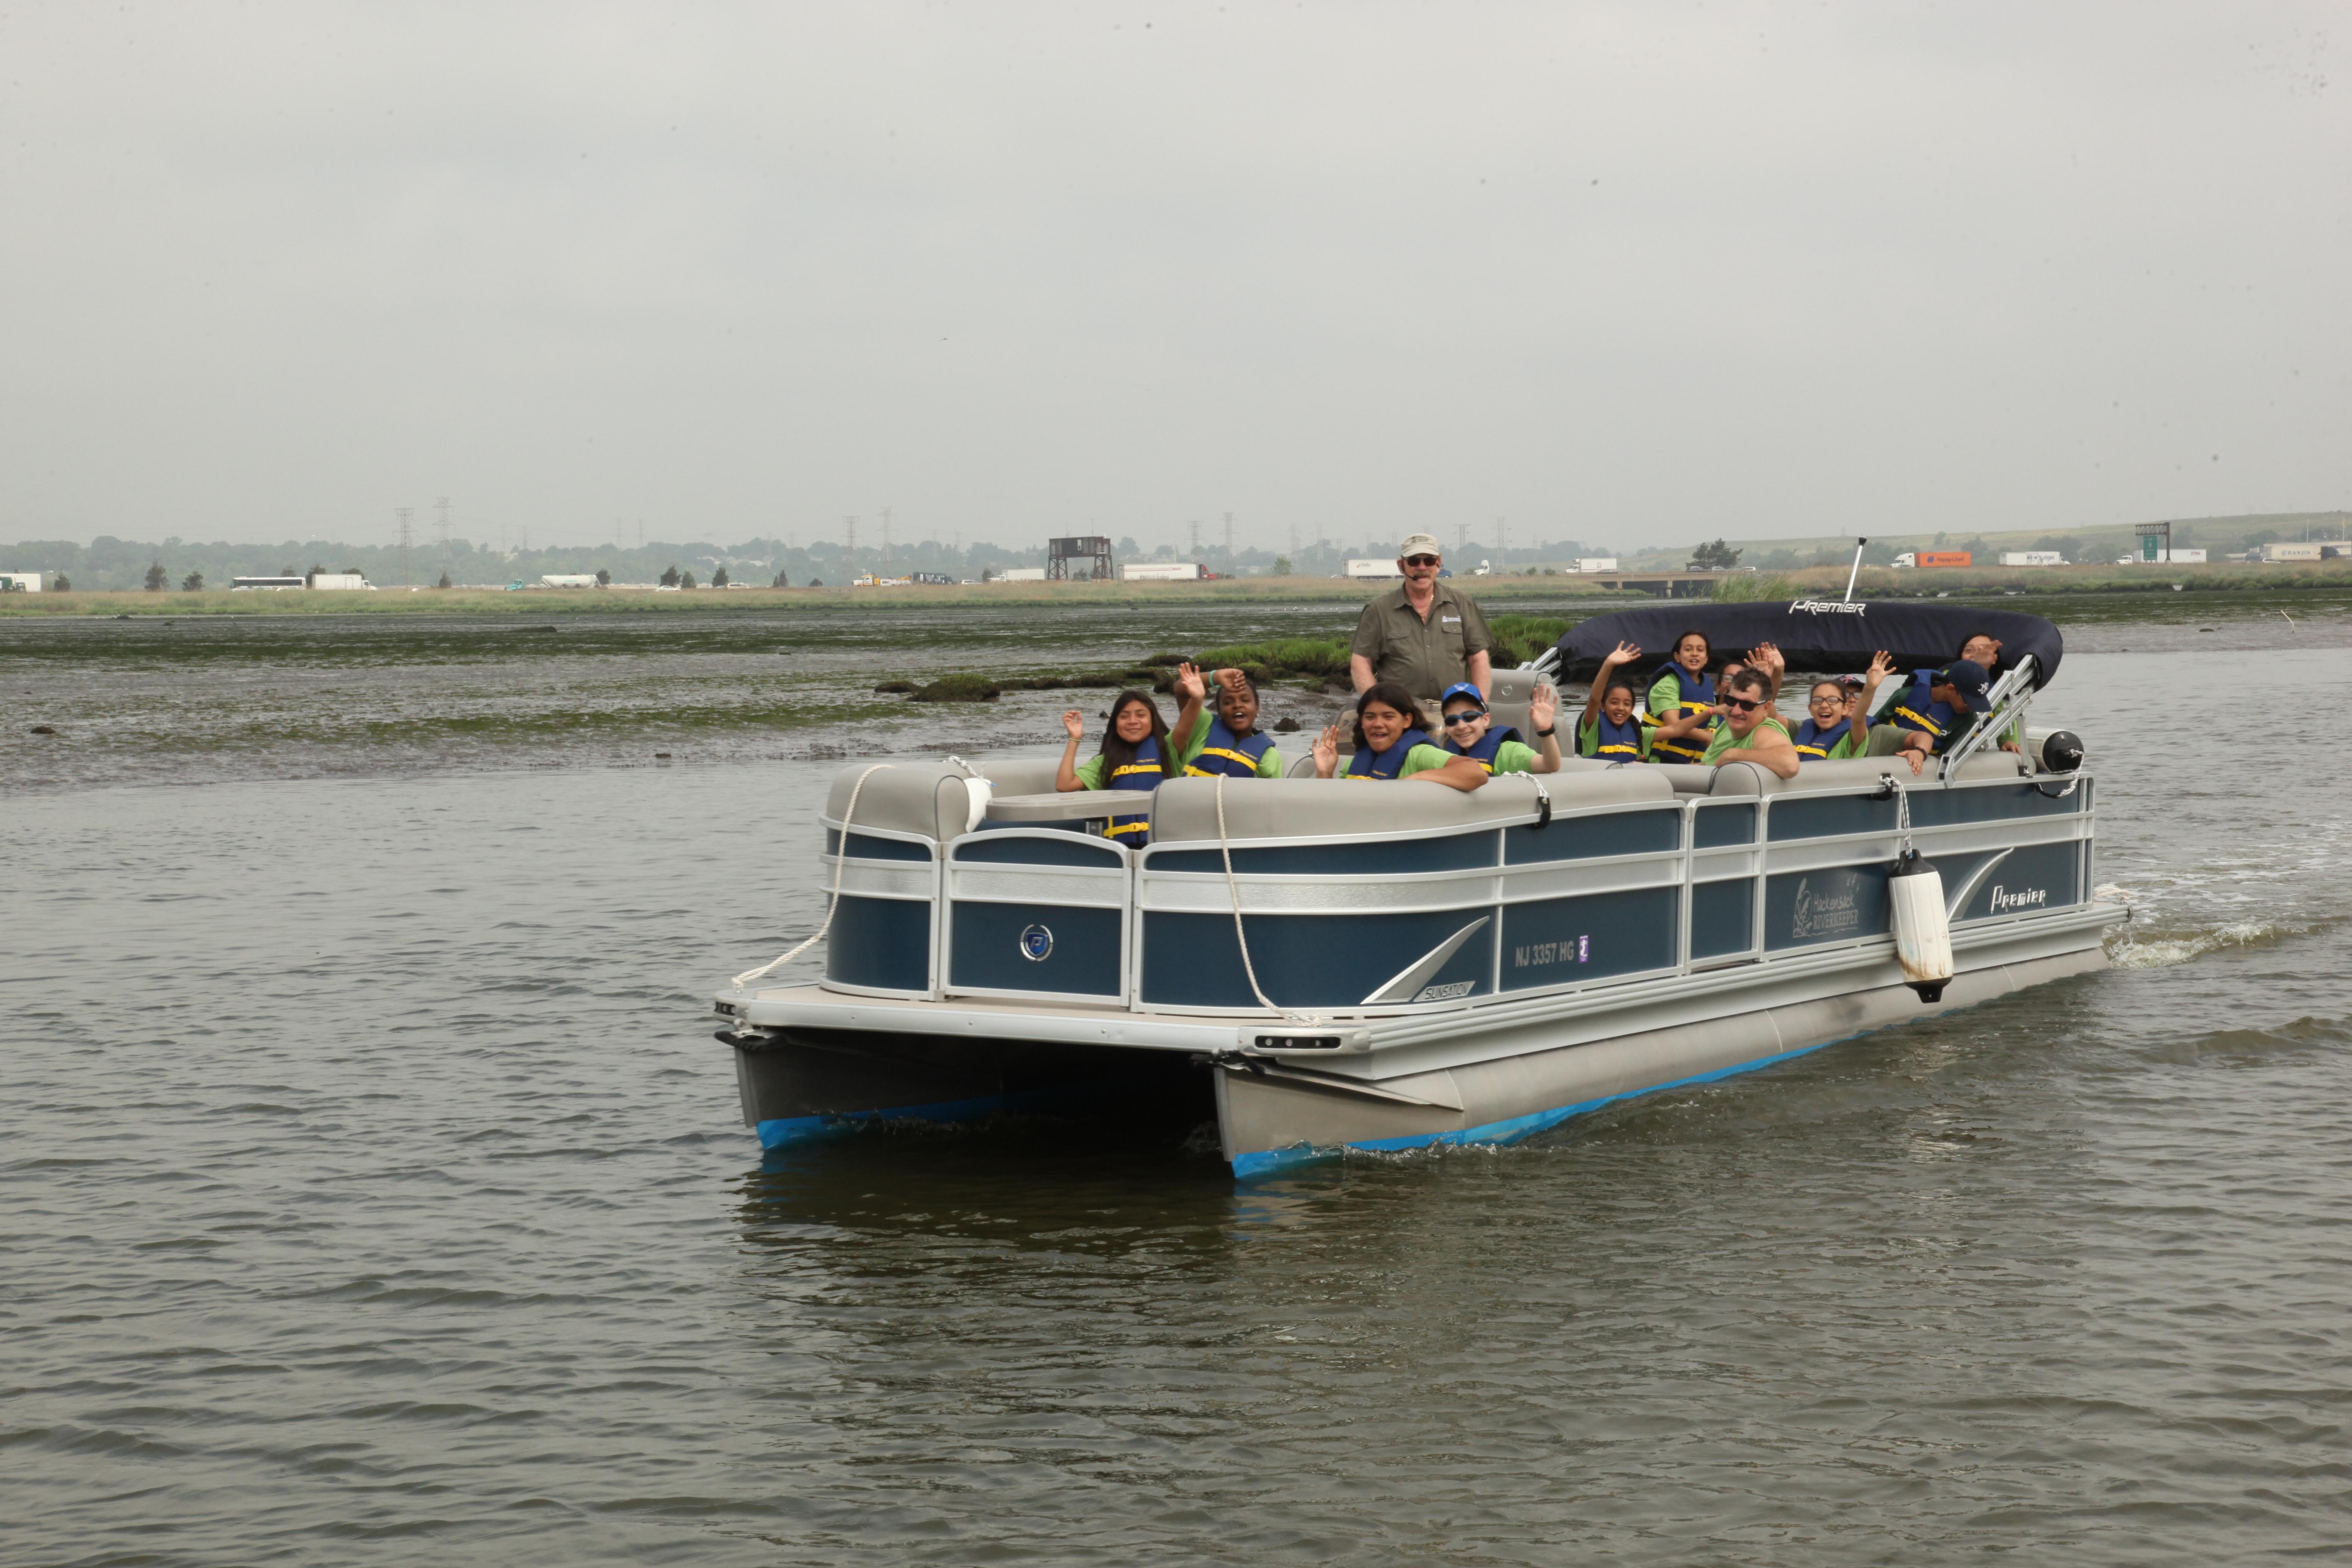 Hackensack Riverkeeper's Open Eco-Cruise - Excursion Around The Bay-2 Boats